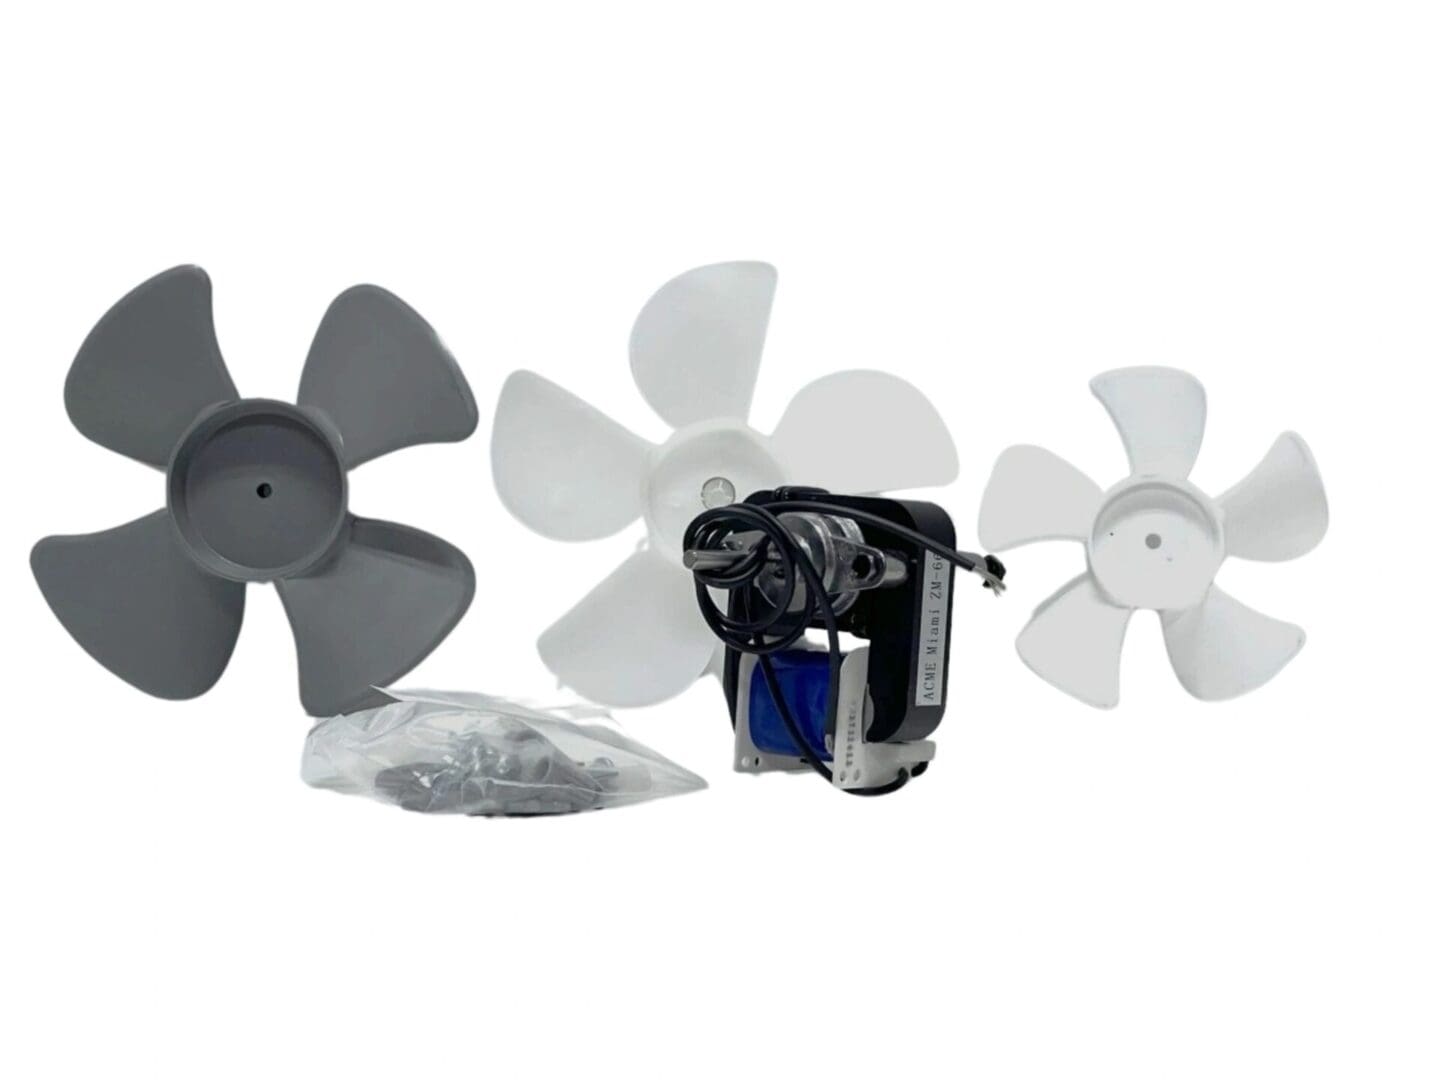 A group of fans and parts for an air conditioner.